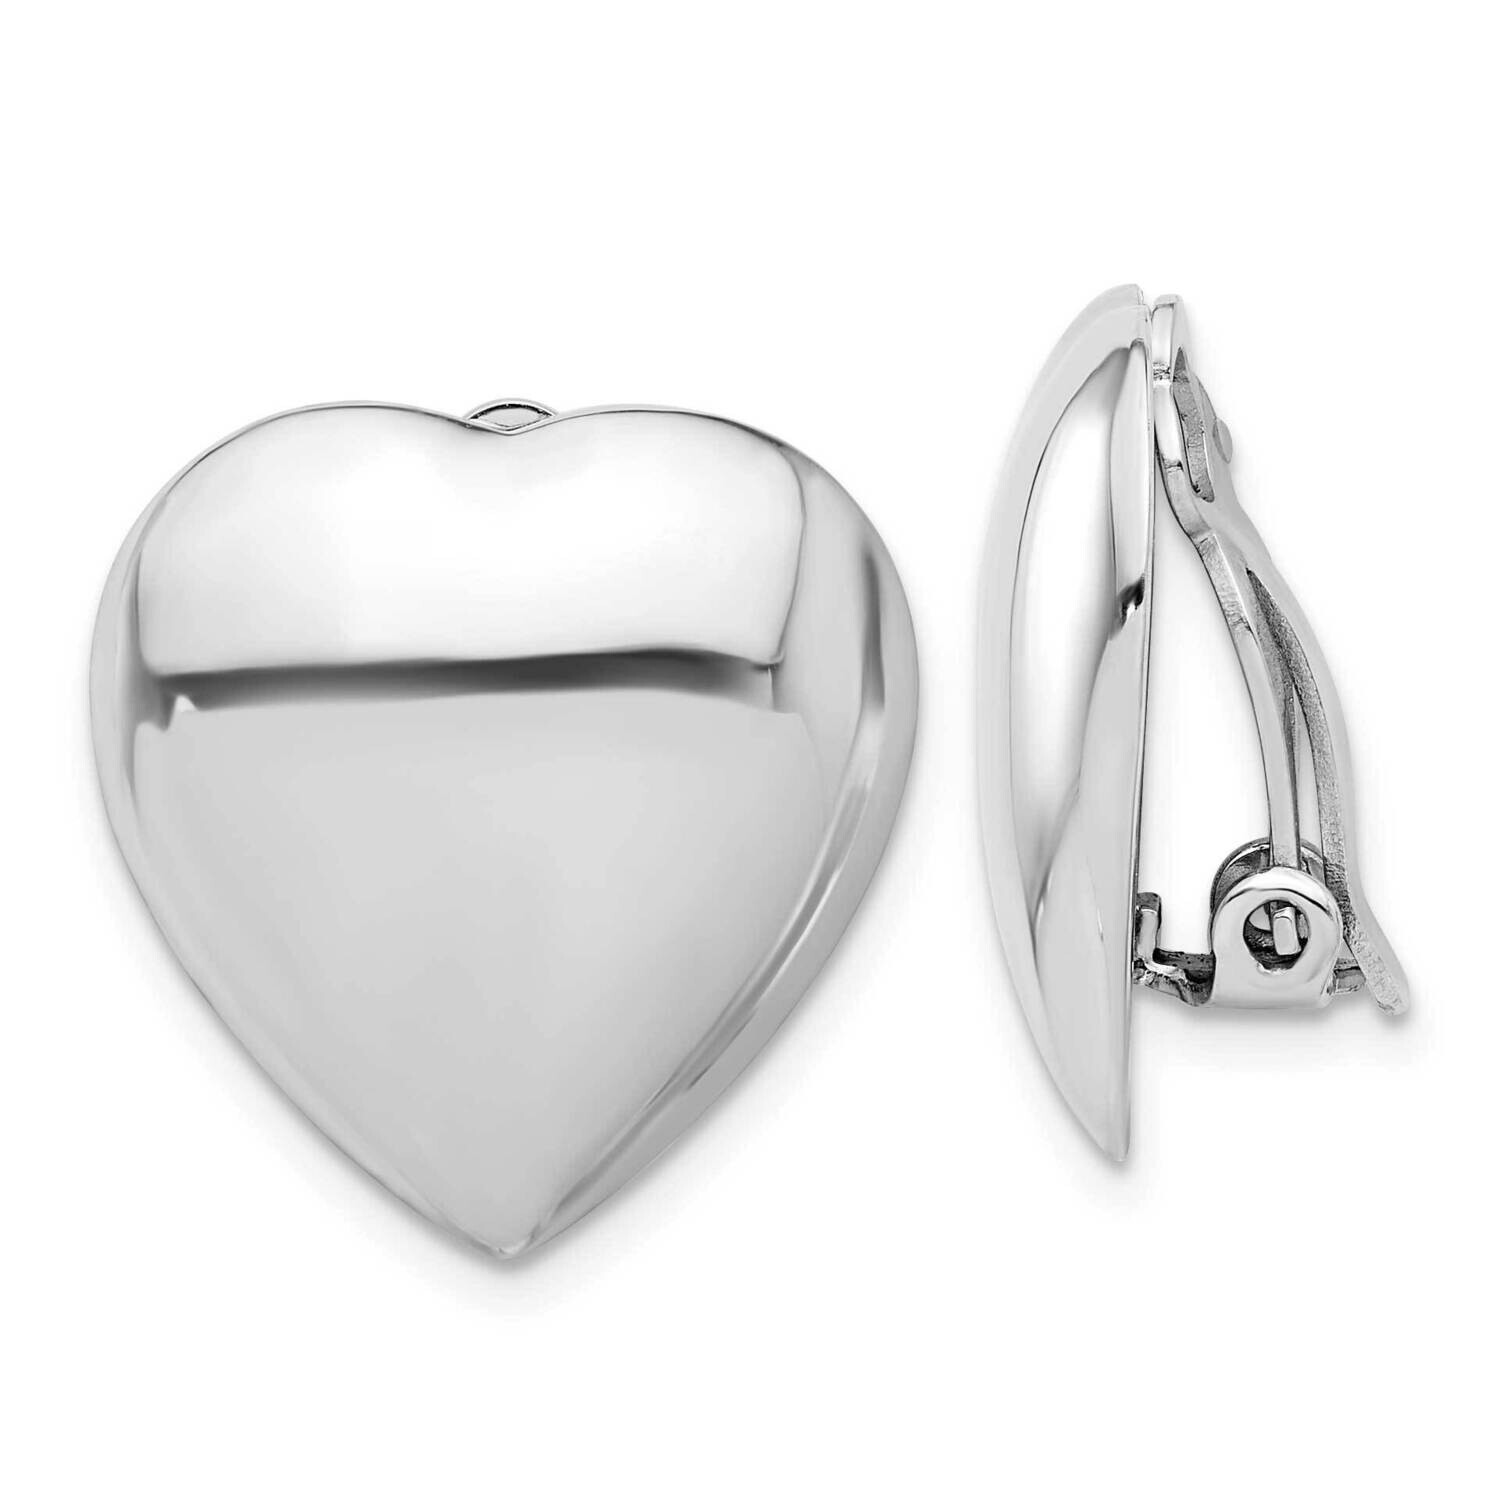 Rhod-Plated Polished Heart Clip Non-Pierced Earrings Sterling Silver QE16926